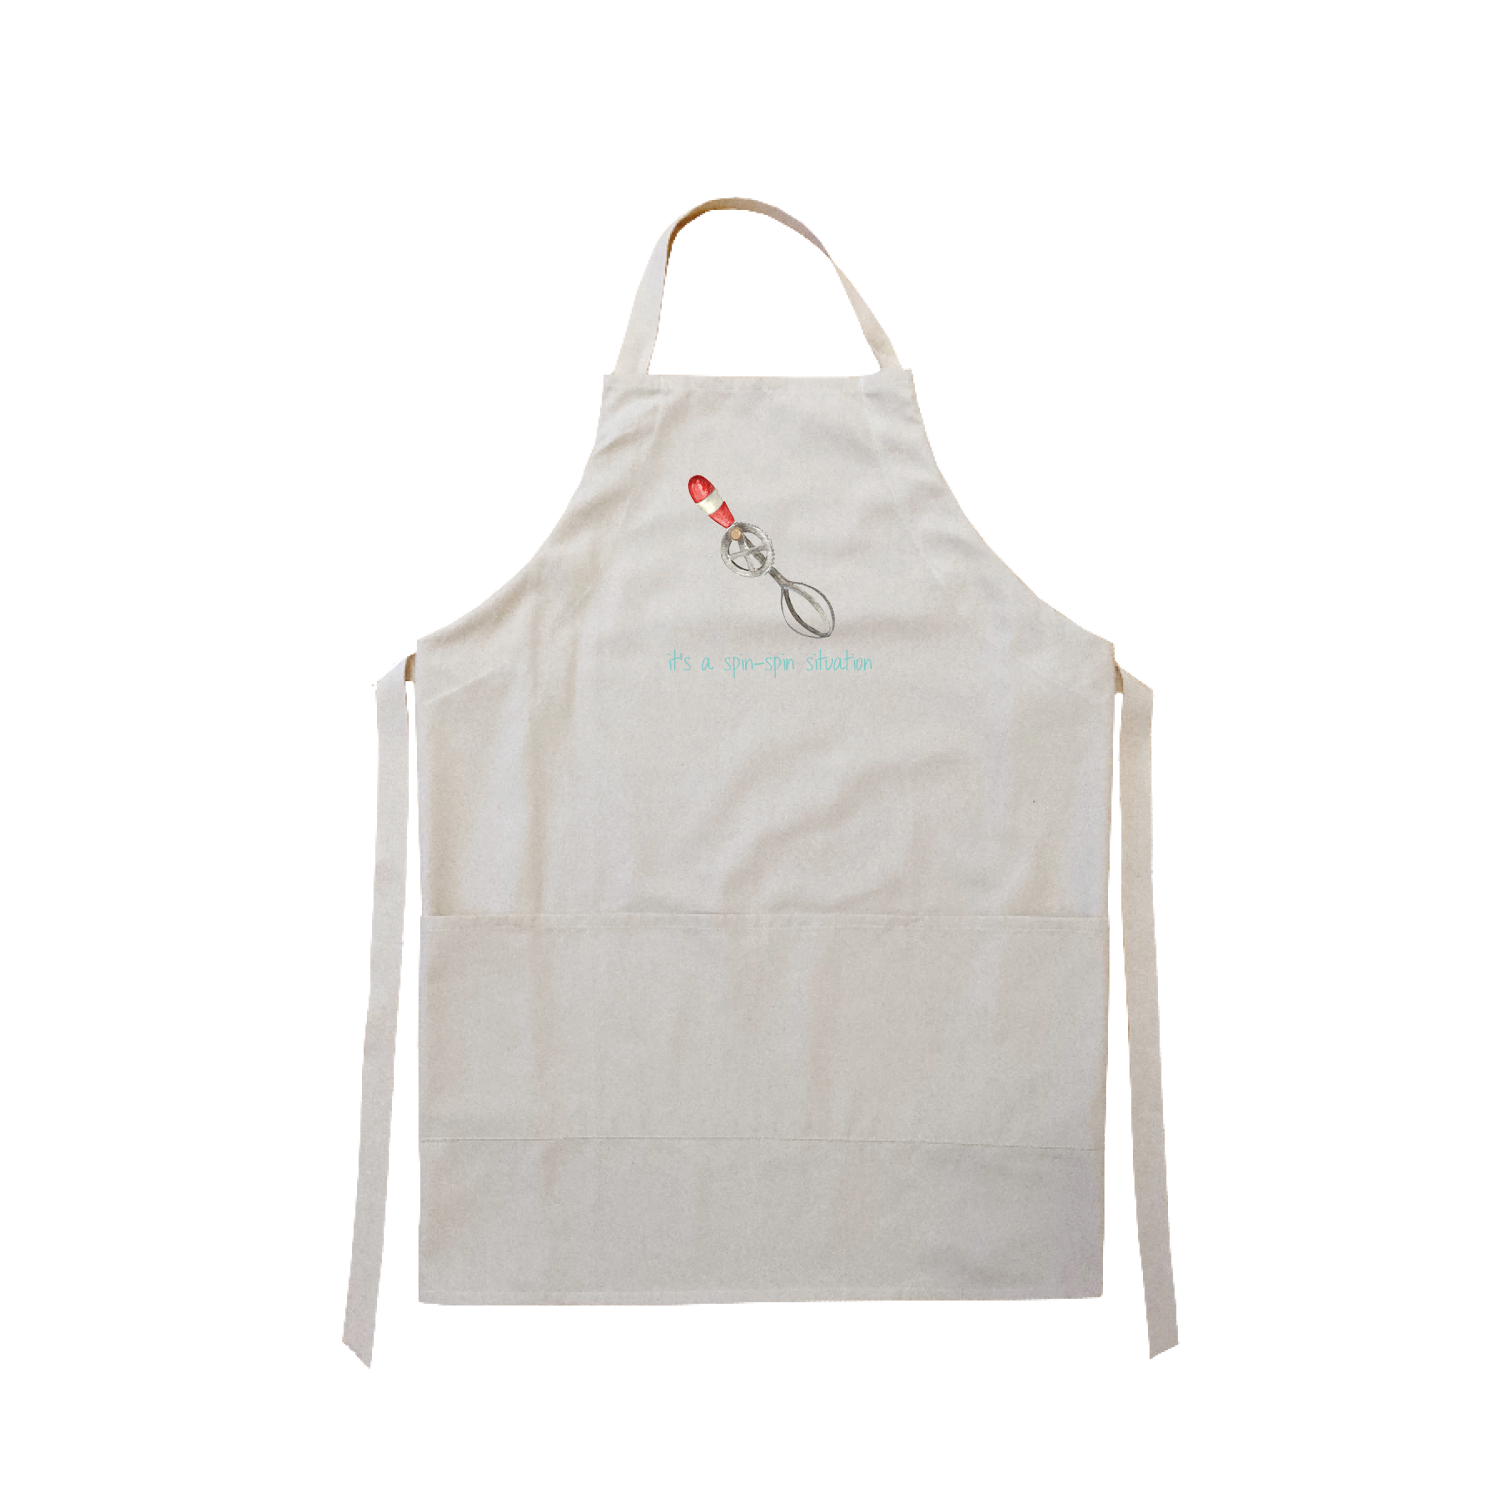 spin-spin apron